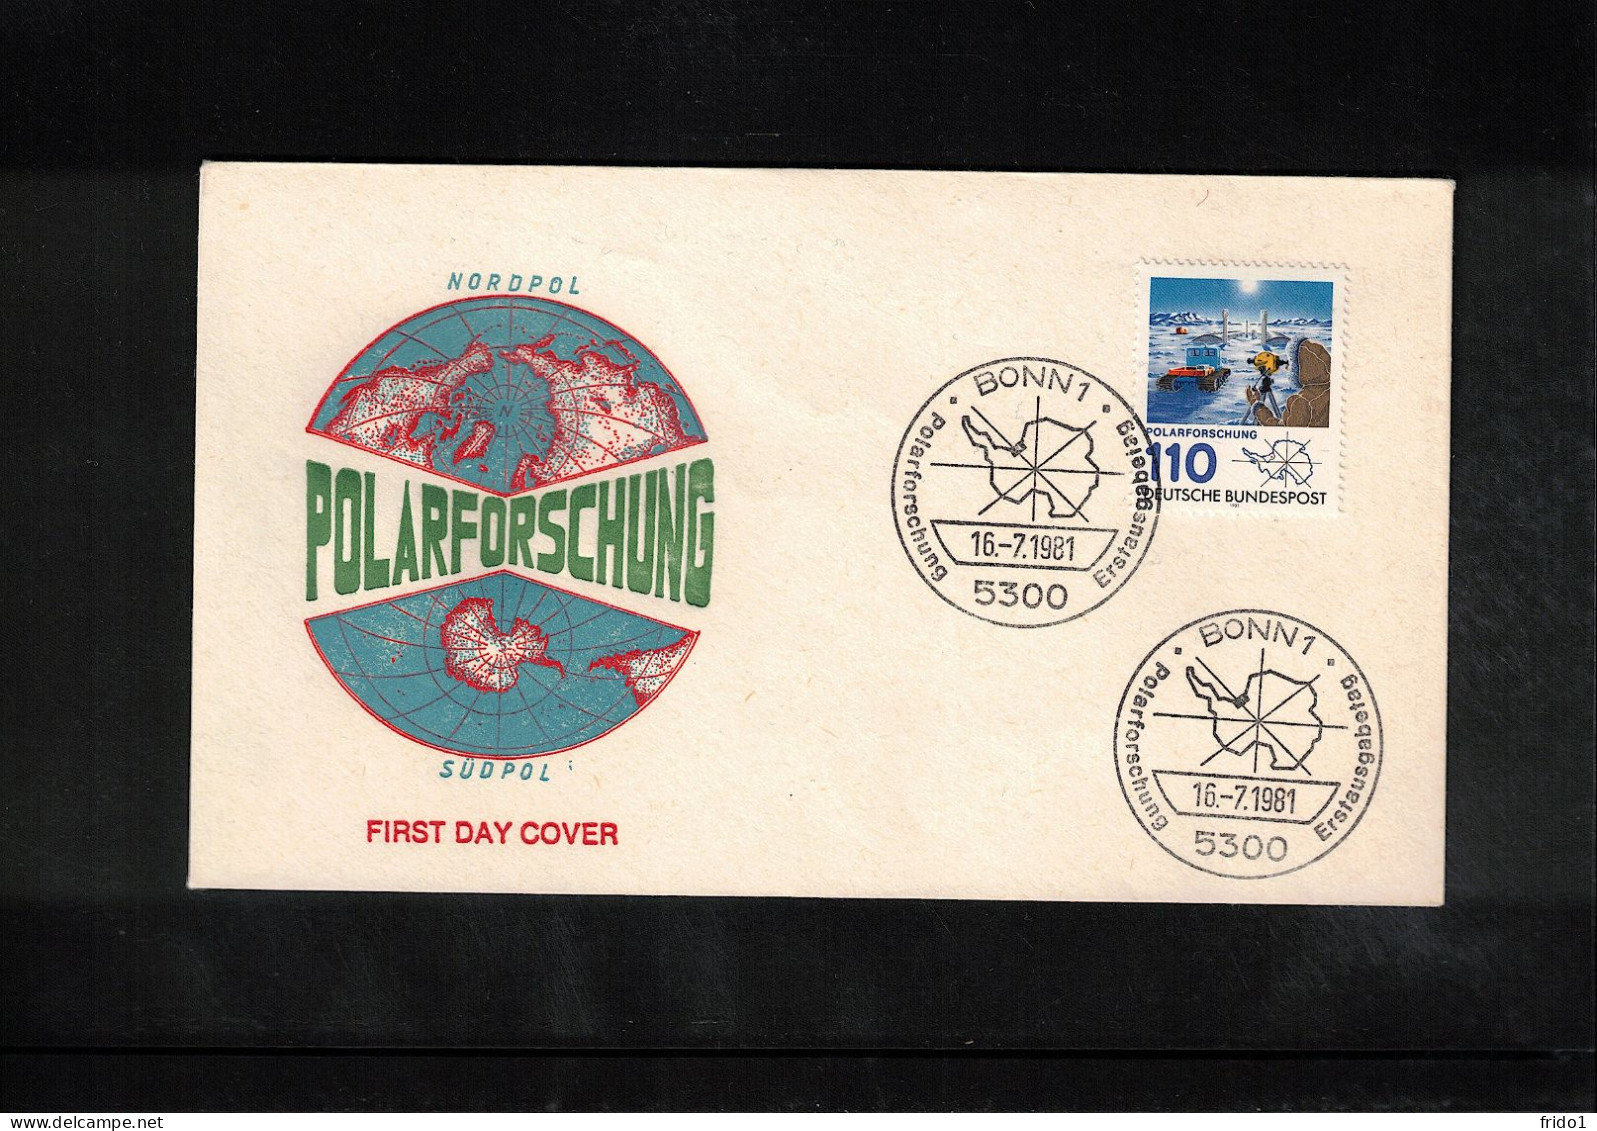 Germany 1981 Polar Research FDC - Forschungsprogramme